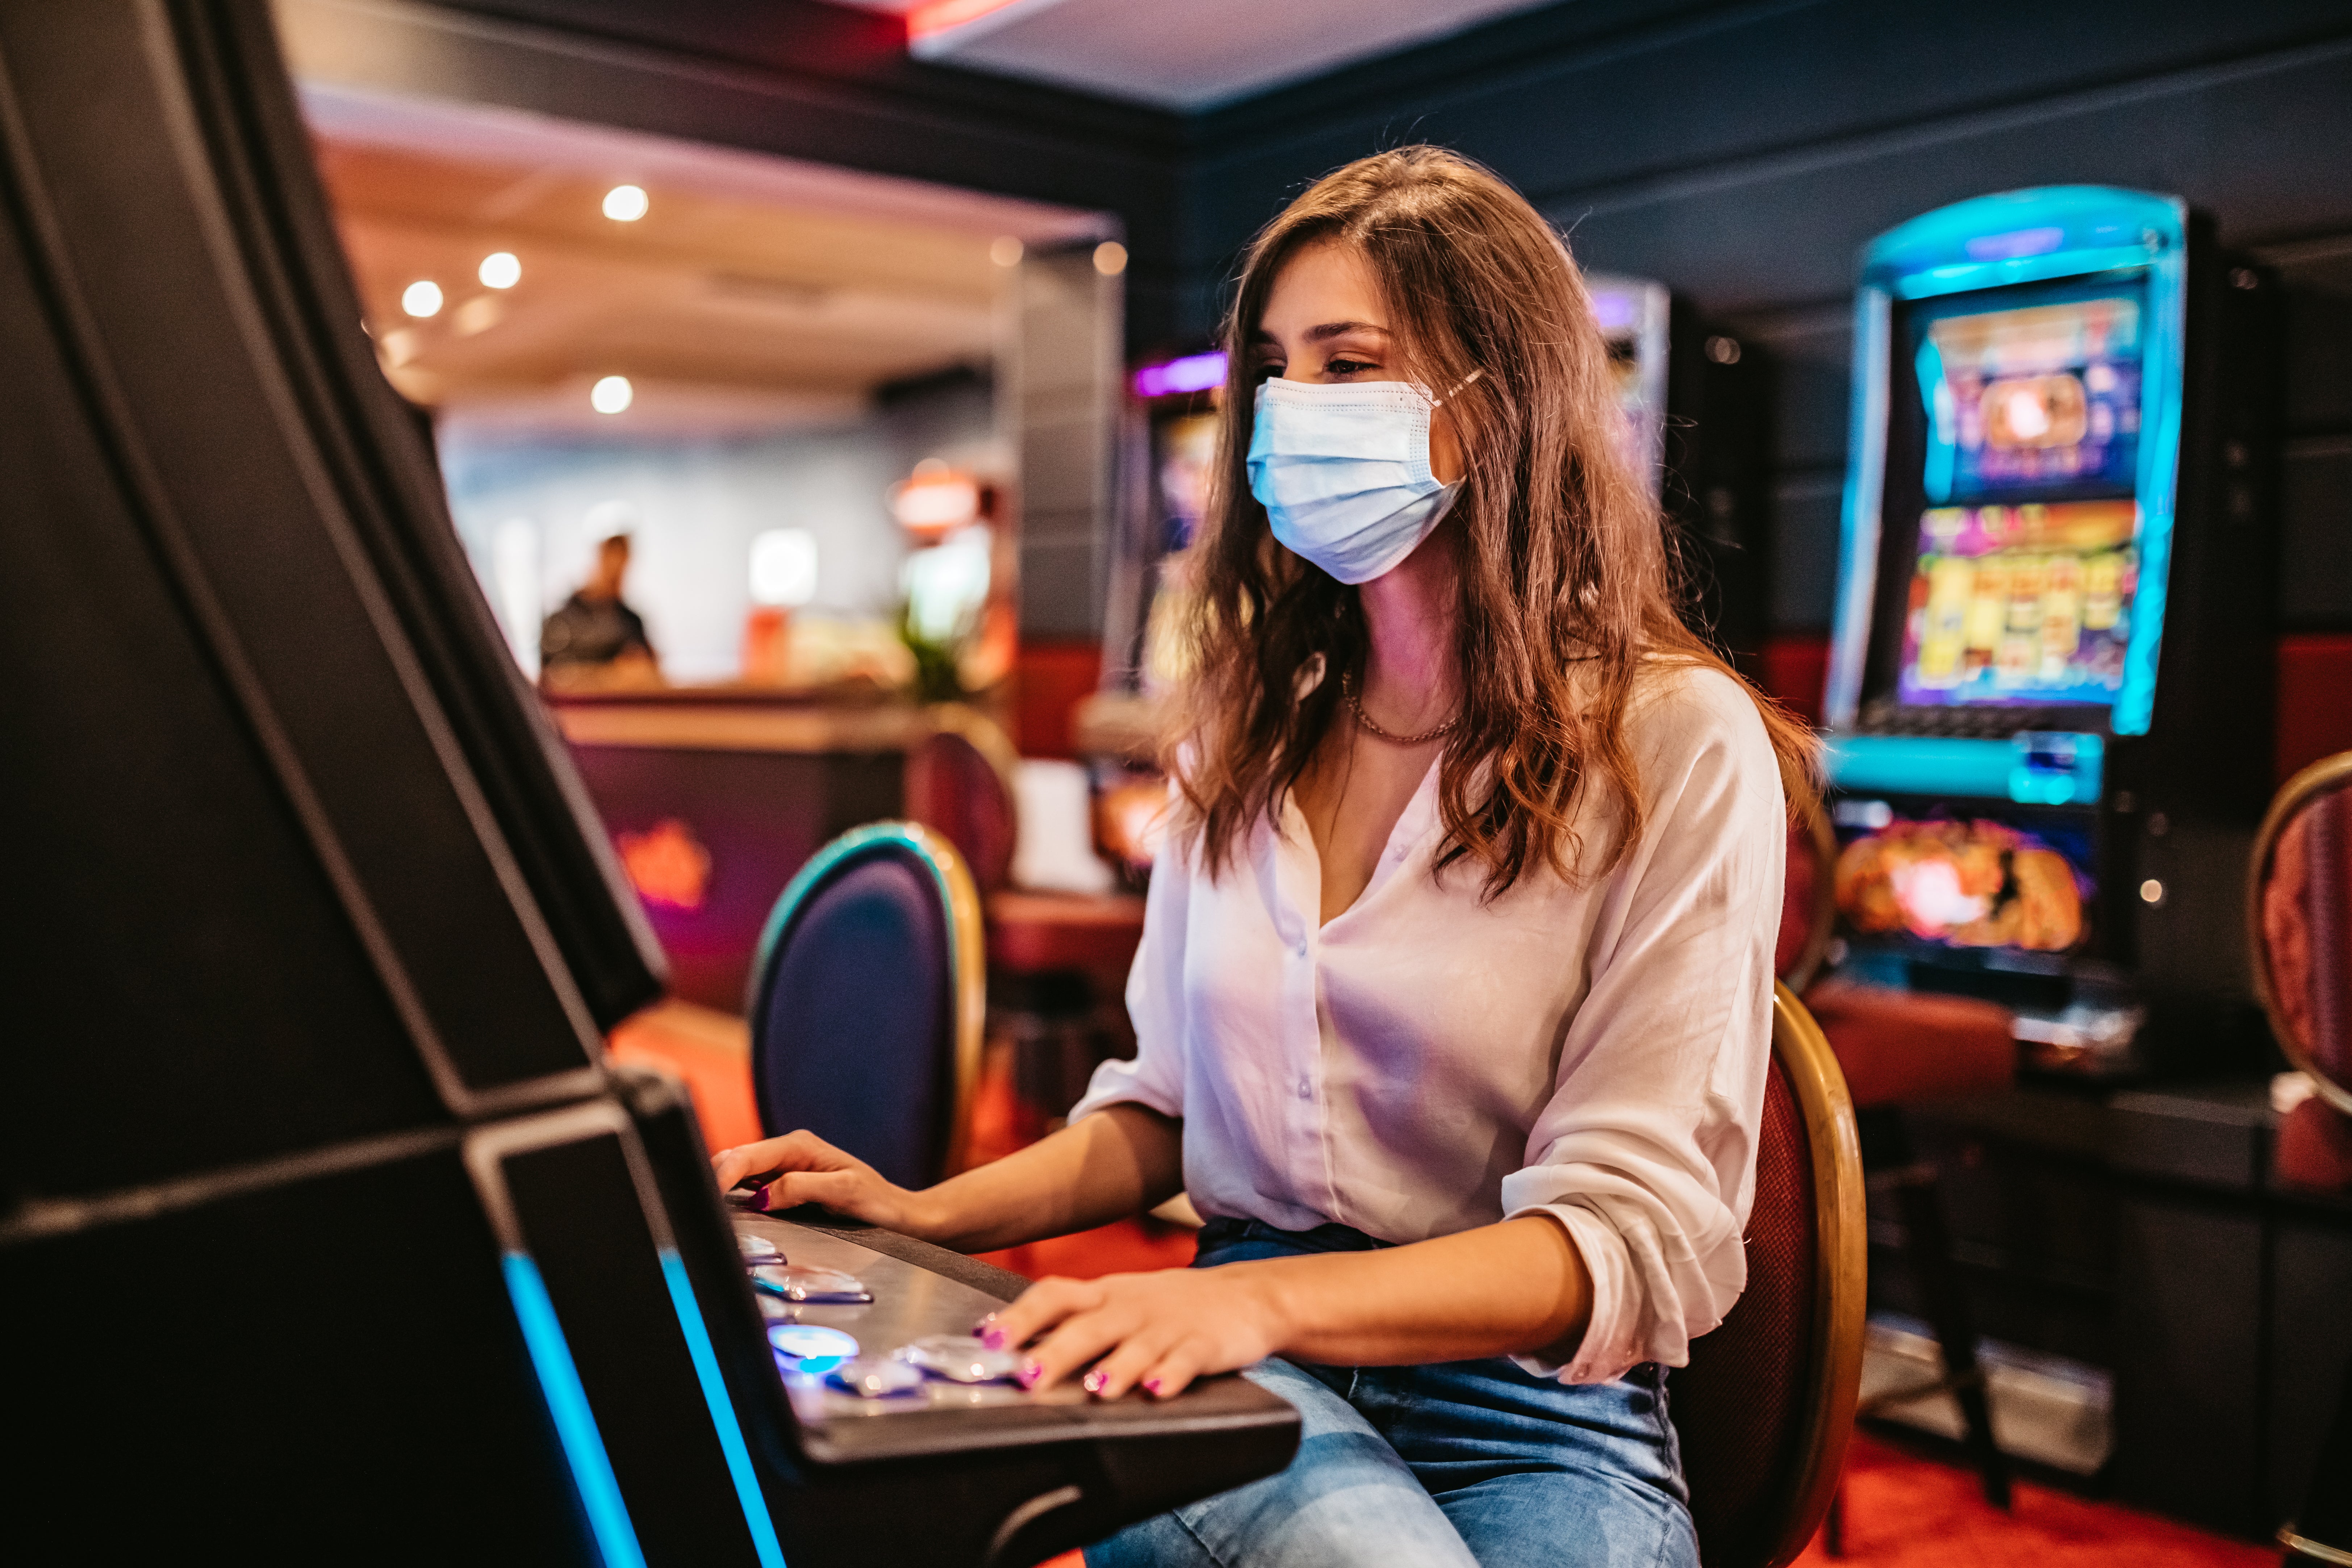 Nevada Casinos are required to have signs about where masks need to be worn